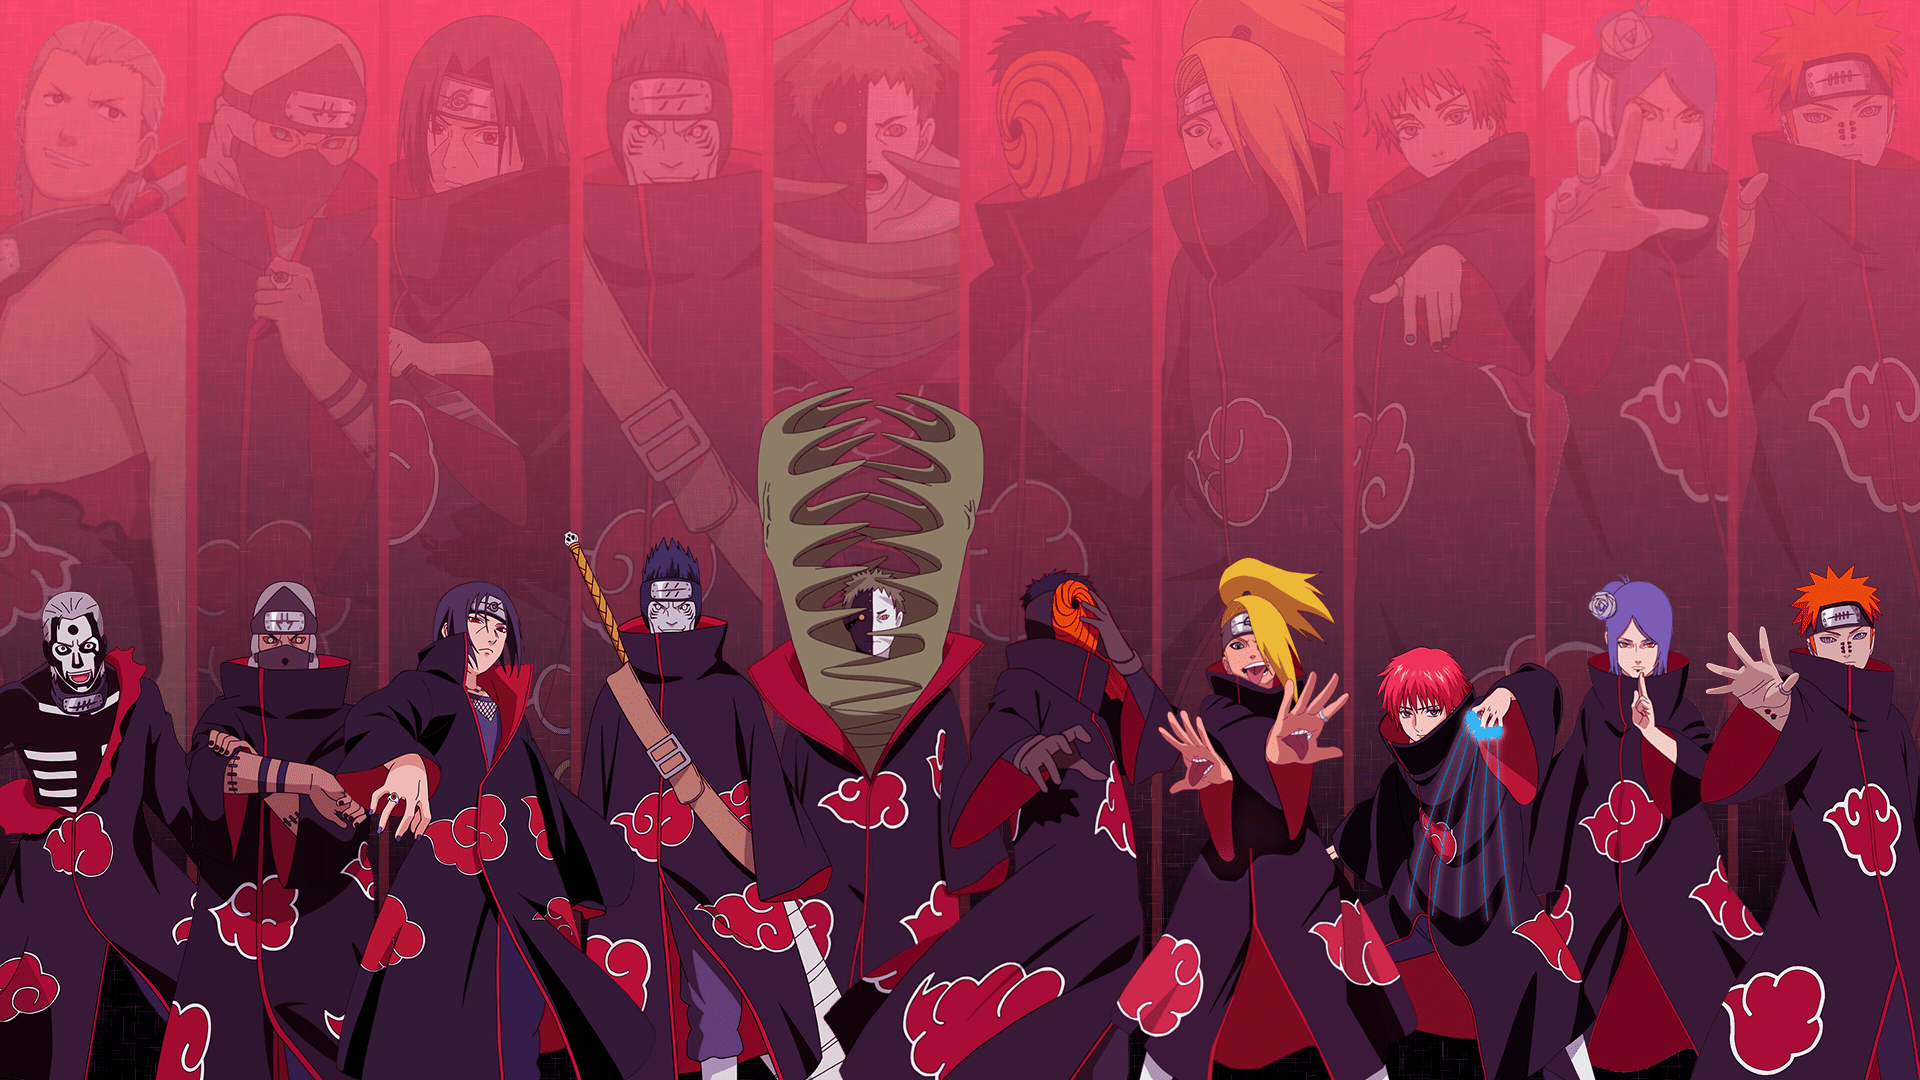 Akatsuki Wallpaper for mobile phone, tablet, desktop computer and other devices HD and 4K wallpaper. Akatsuki, Naruto wallpaper, Wallpaper naruto shippuden